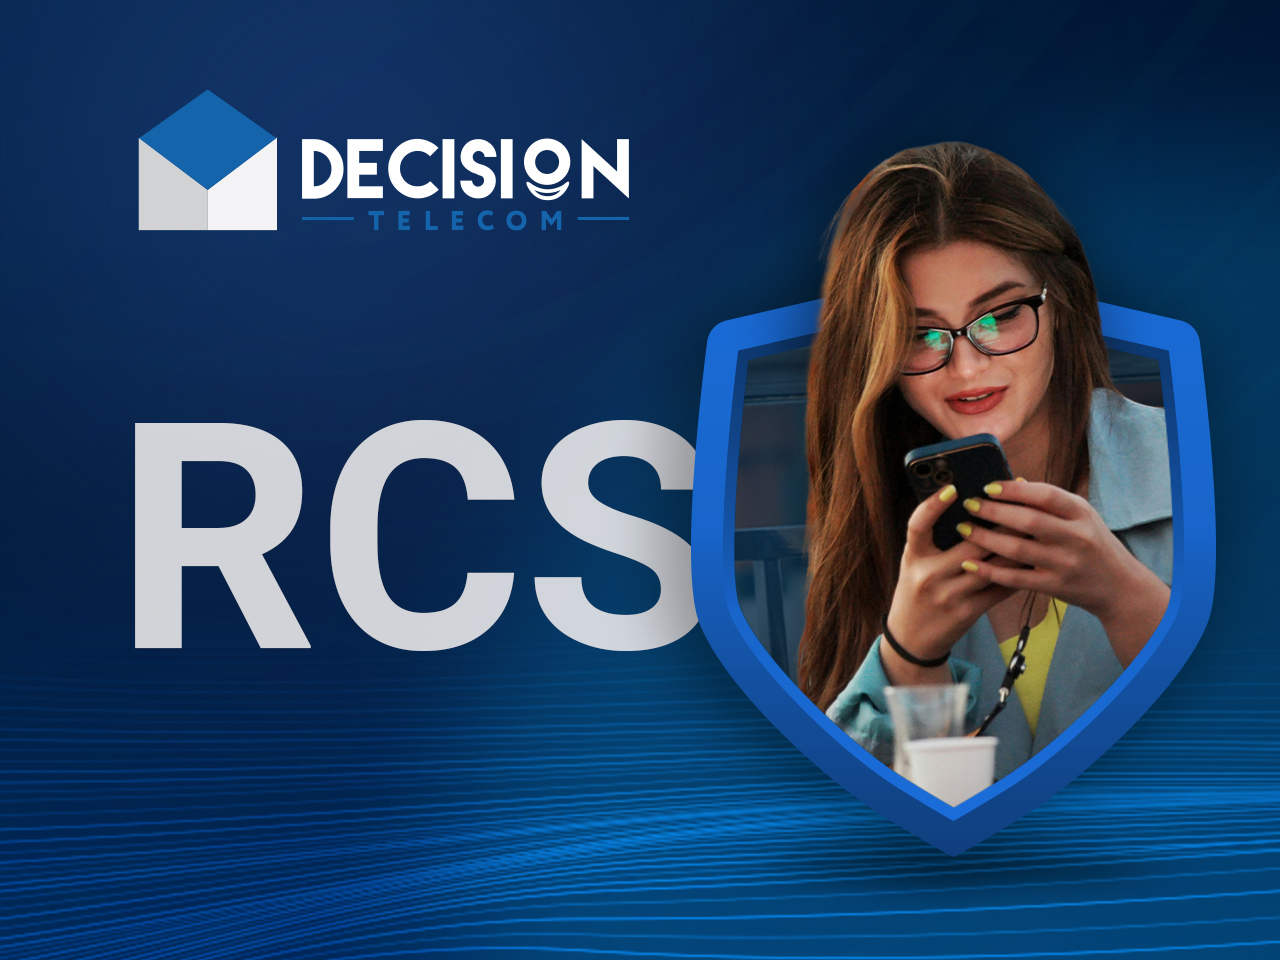 How is the protection of RCS chats ensured?